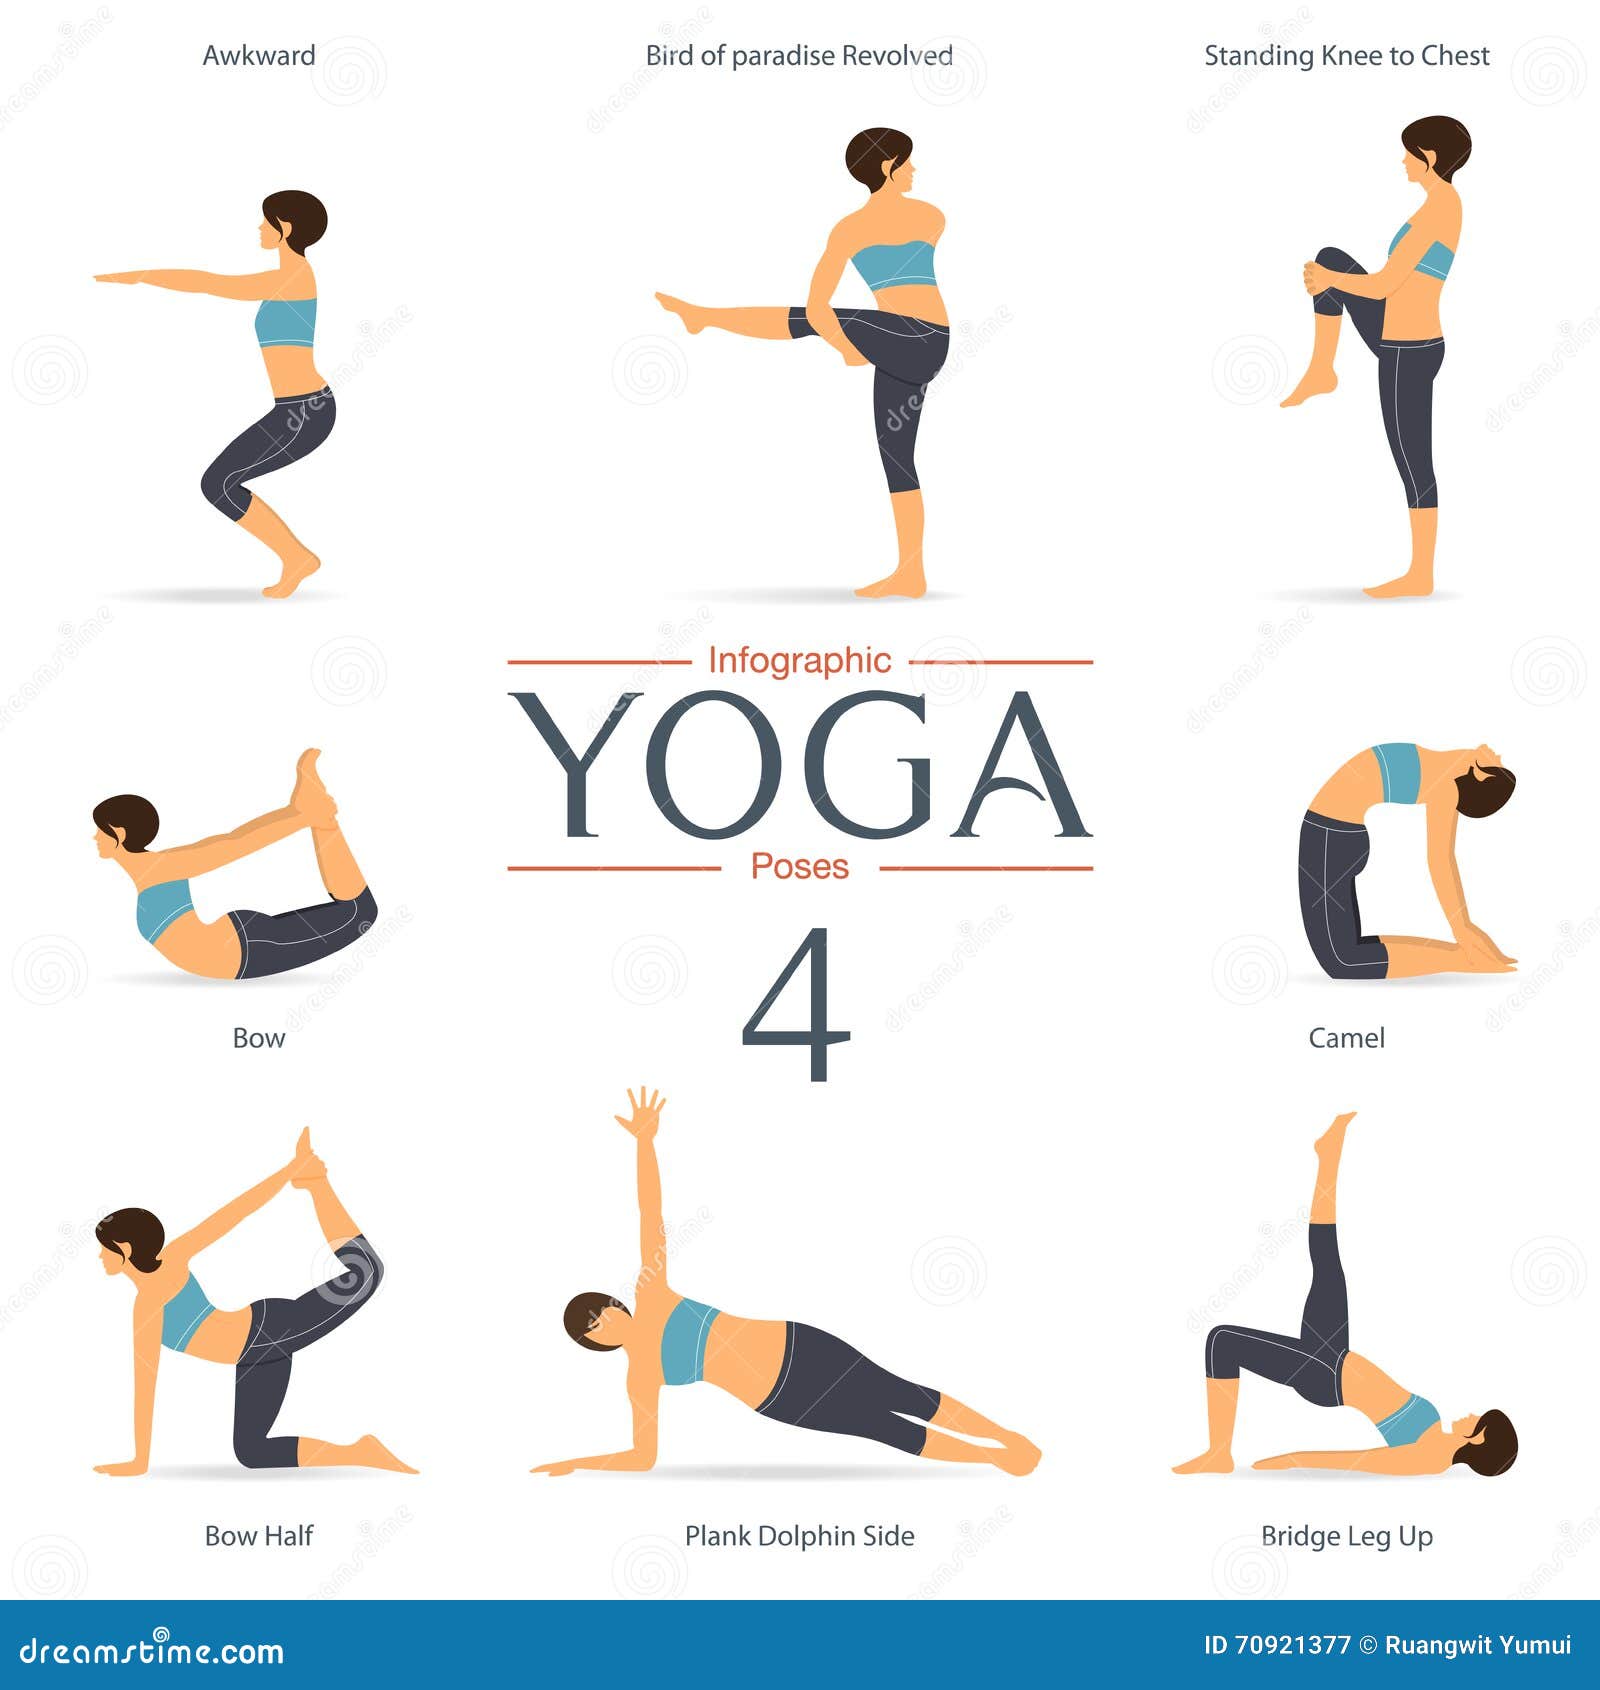 Details more than 71 yoga poses hd images - stylex.vn